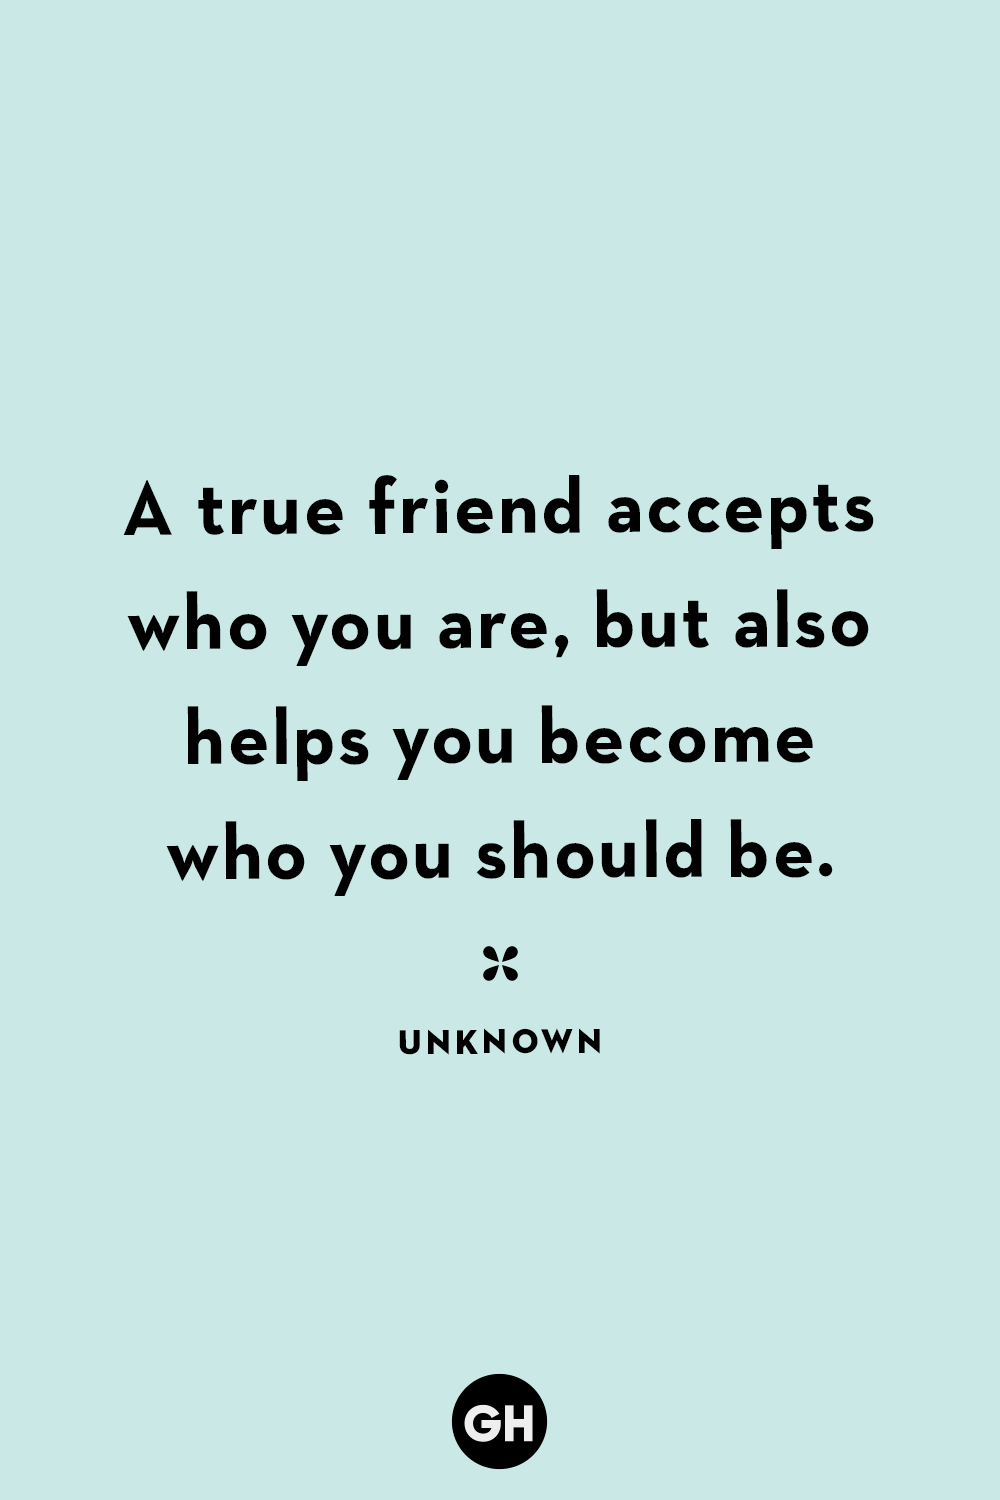 good friendship should be based on